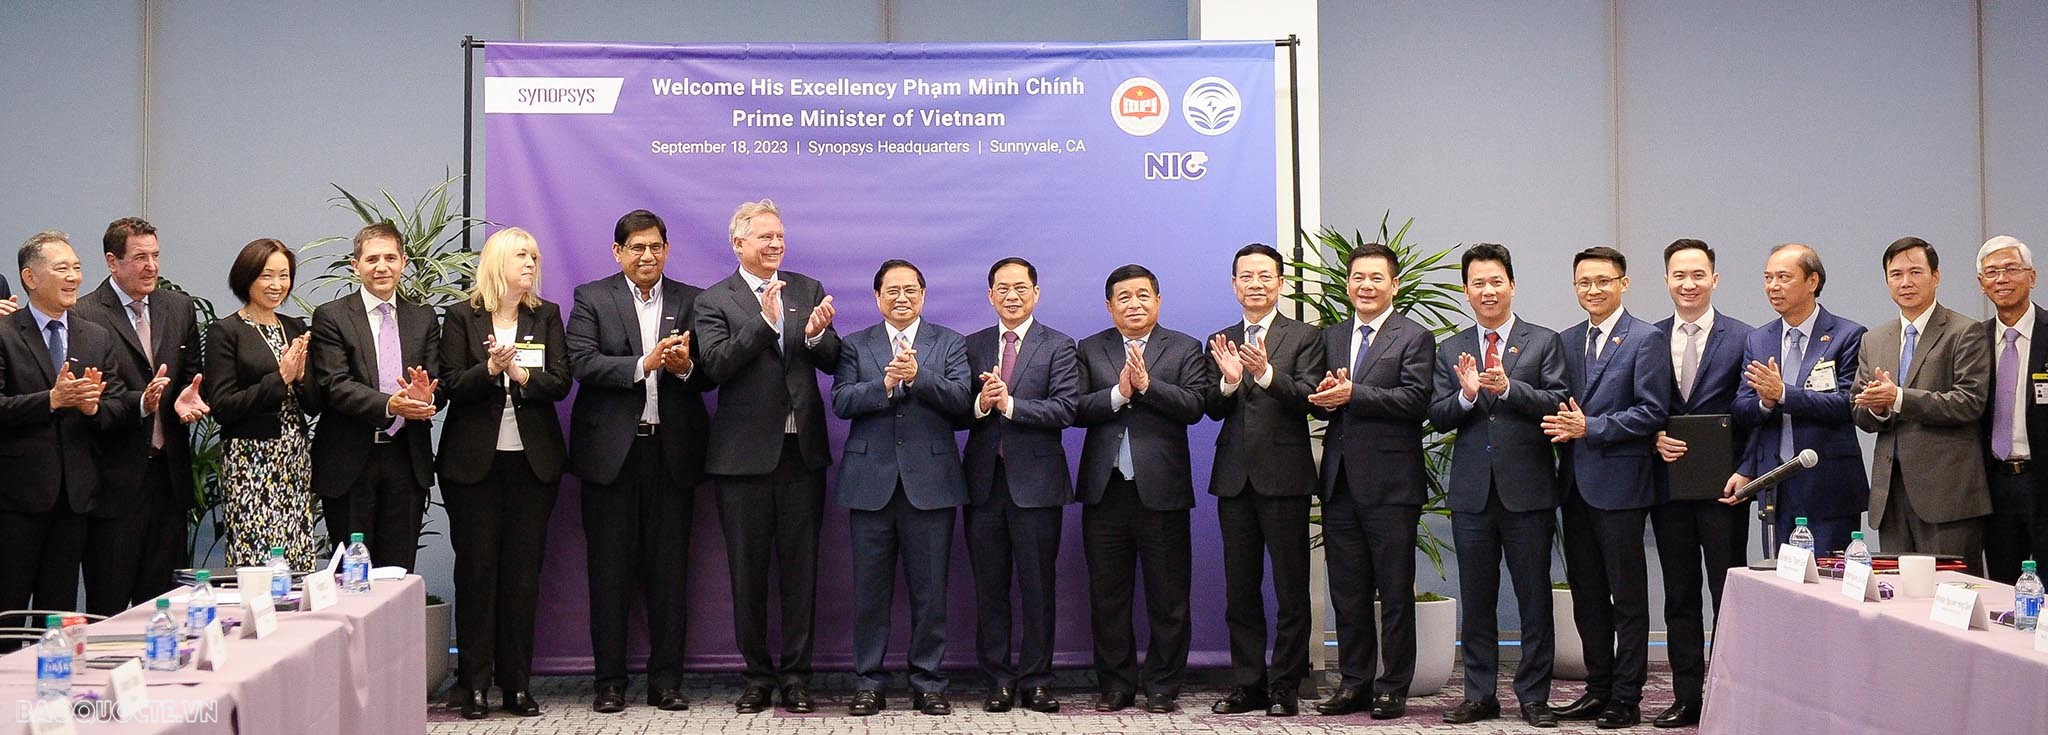 PM Pham Minh Chinh visits leading tech firms in Silicon Valley